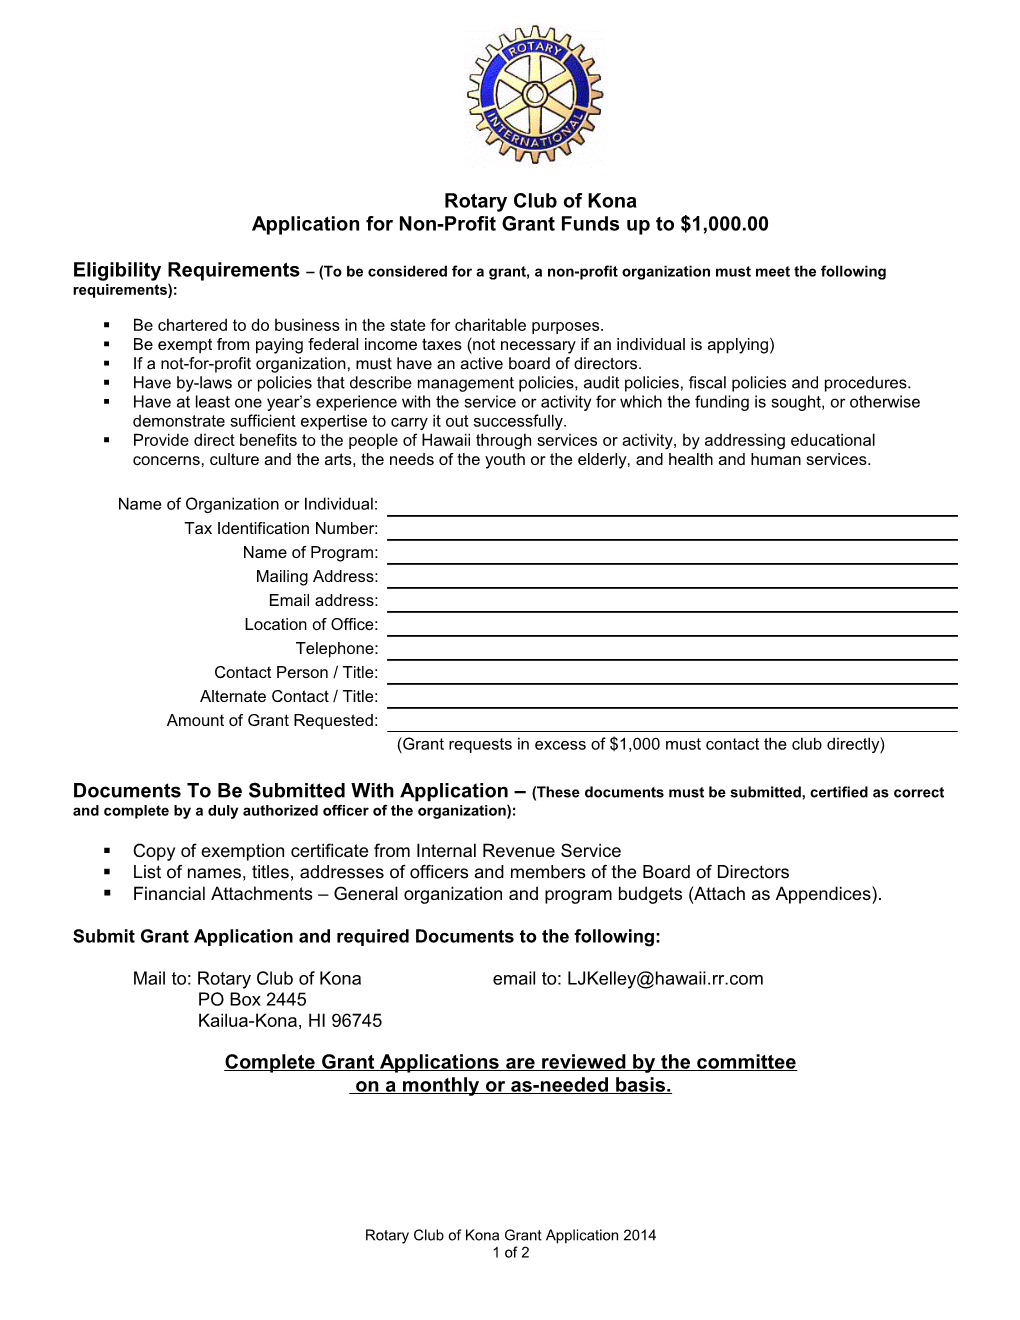 Application for Non-Profit Grant Funds